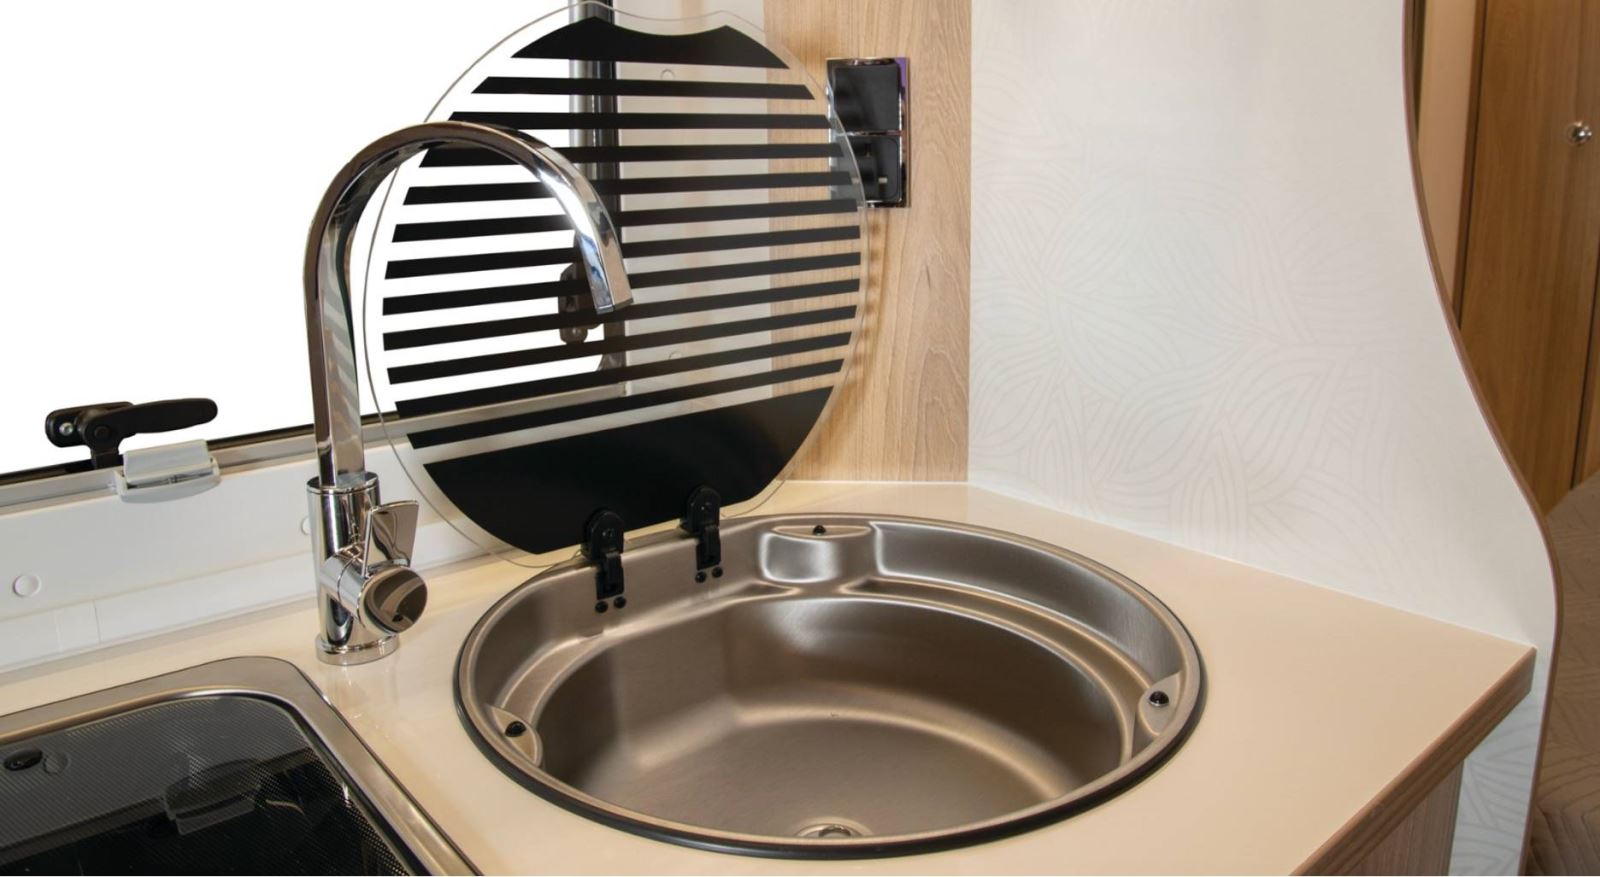 The sink inside the Fantaisy 440 CL